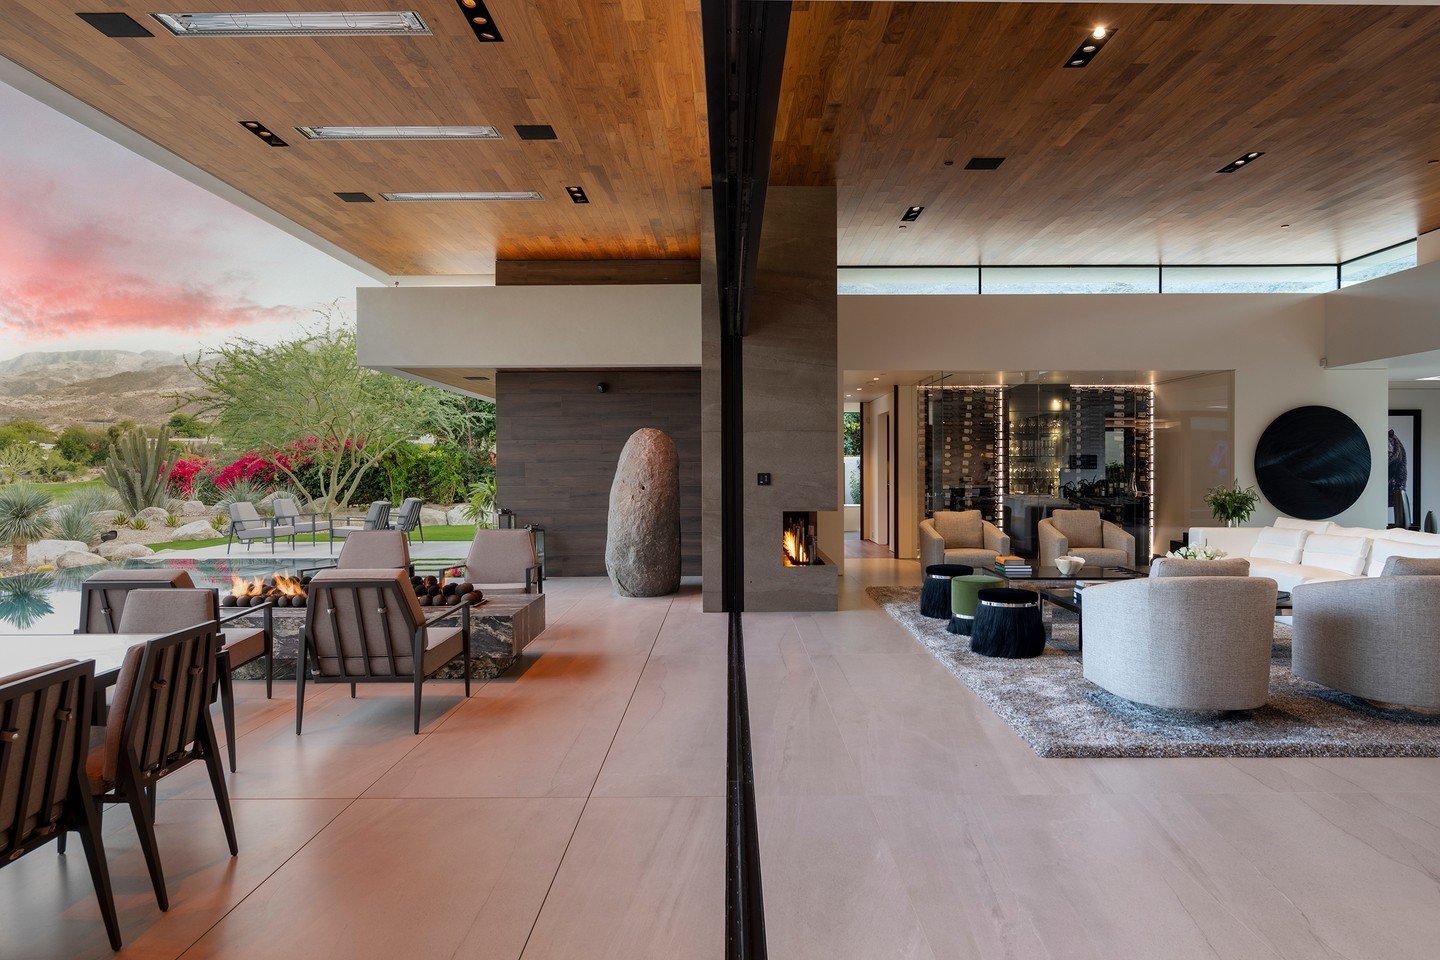 Indoor outdoor living at our resort style Bighorn House in Palm Desert, California. Photo by @maccollum, interior design by @carlakalwaitisdesign, landscape architecture by @attingerlandscapearchitecture